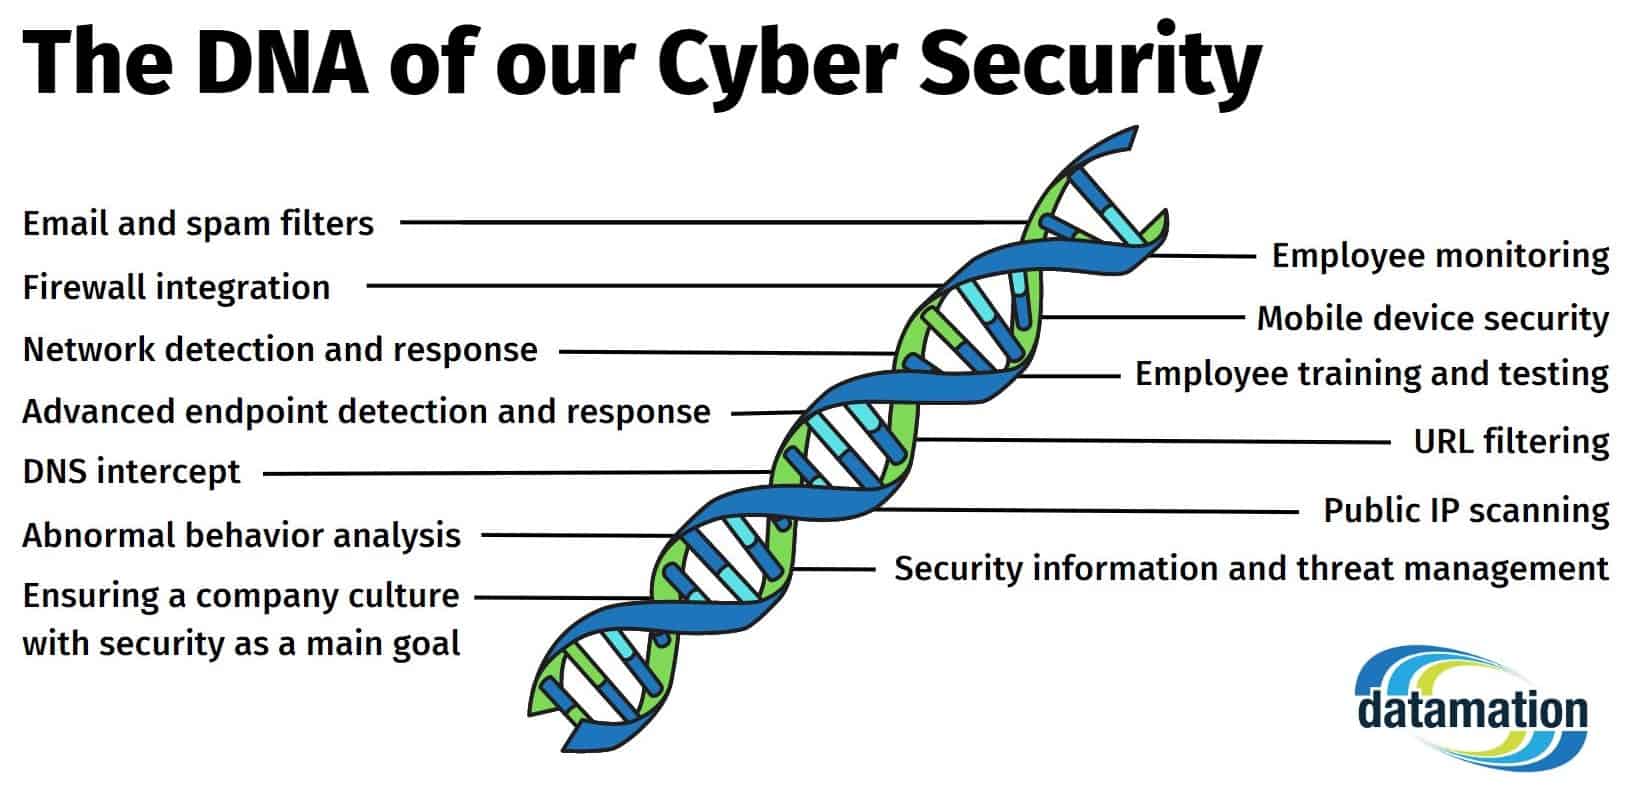 dna datamation cyber security